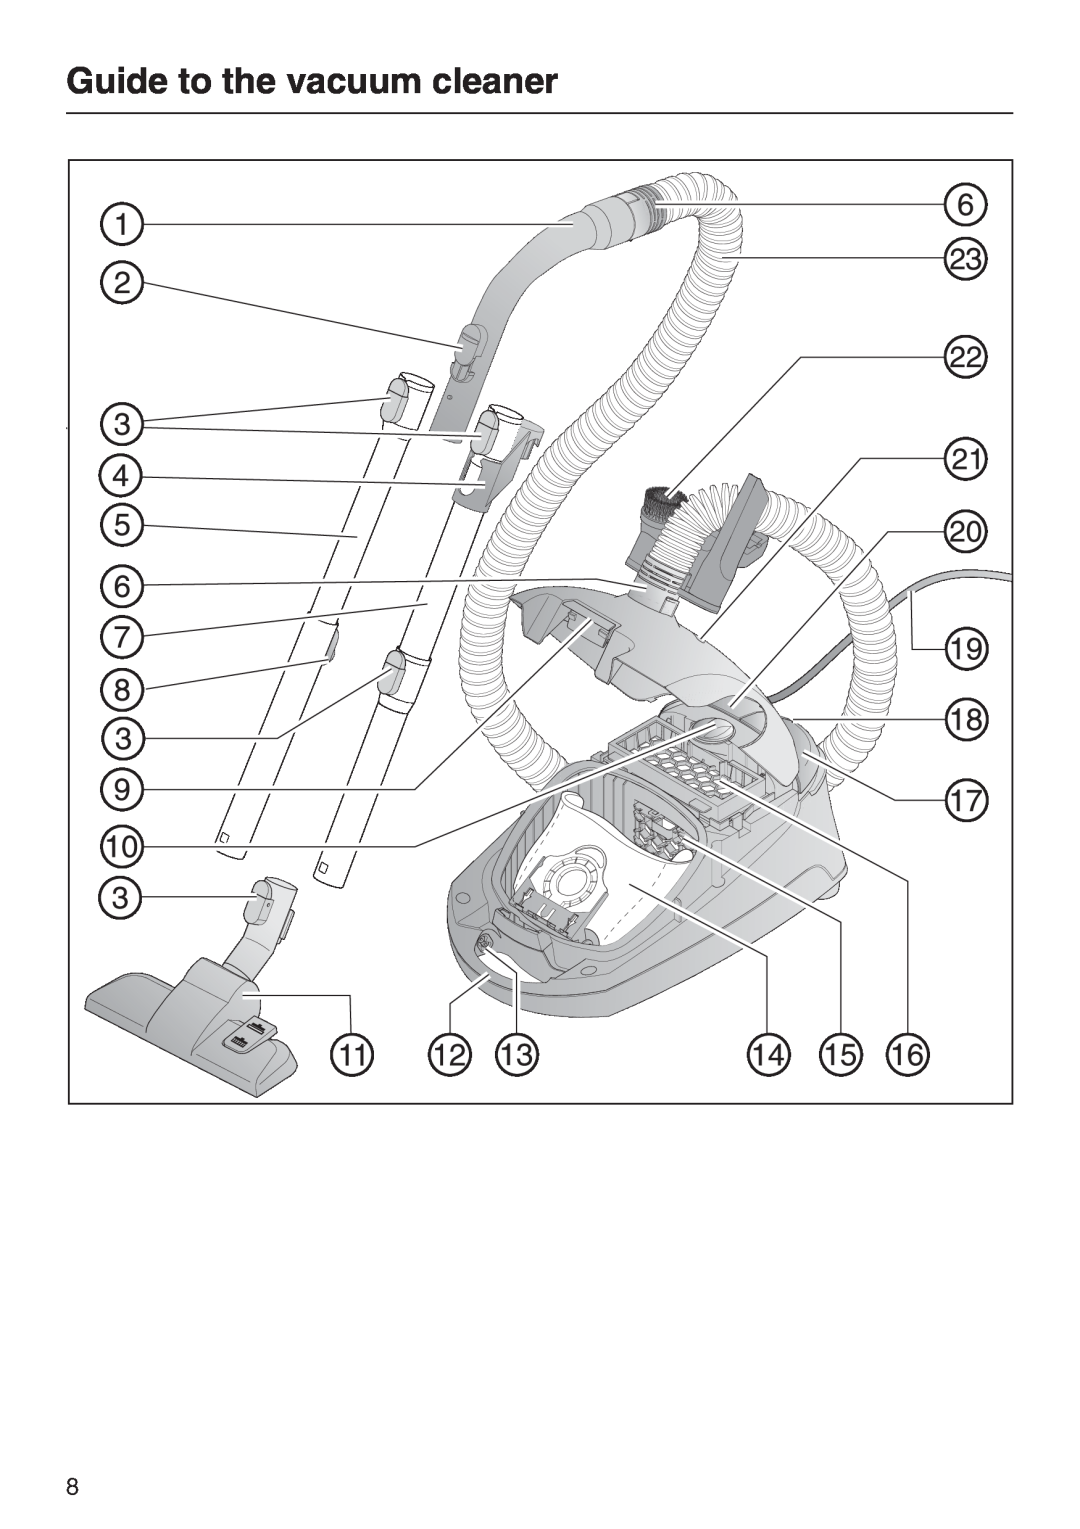 Miele S 2000 operating instructions Guide to the vacuum cleaner 